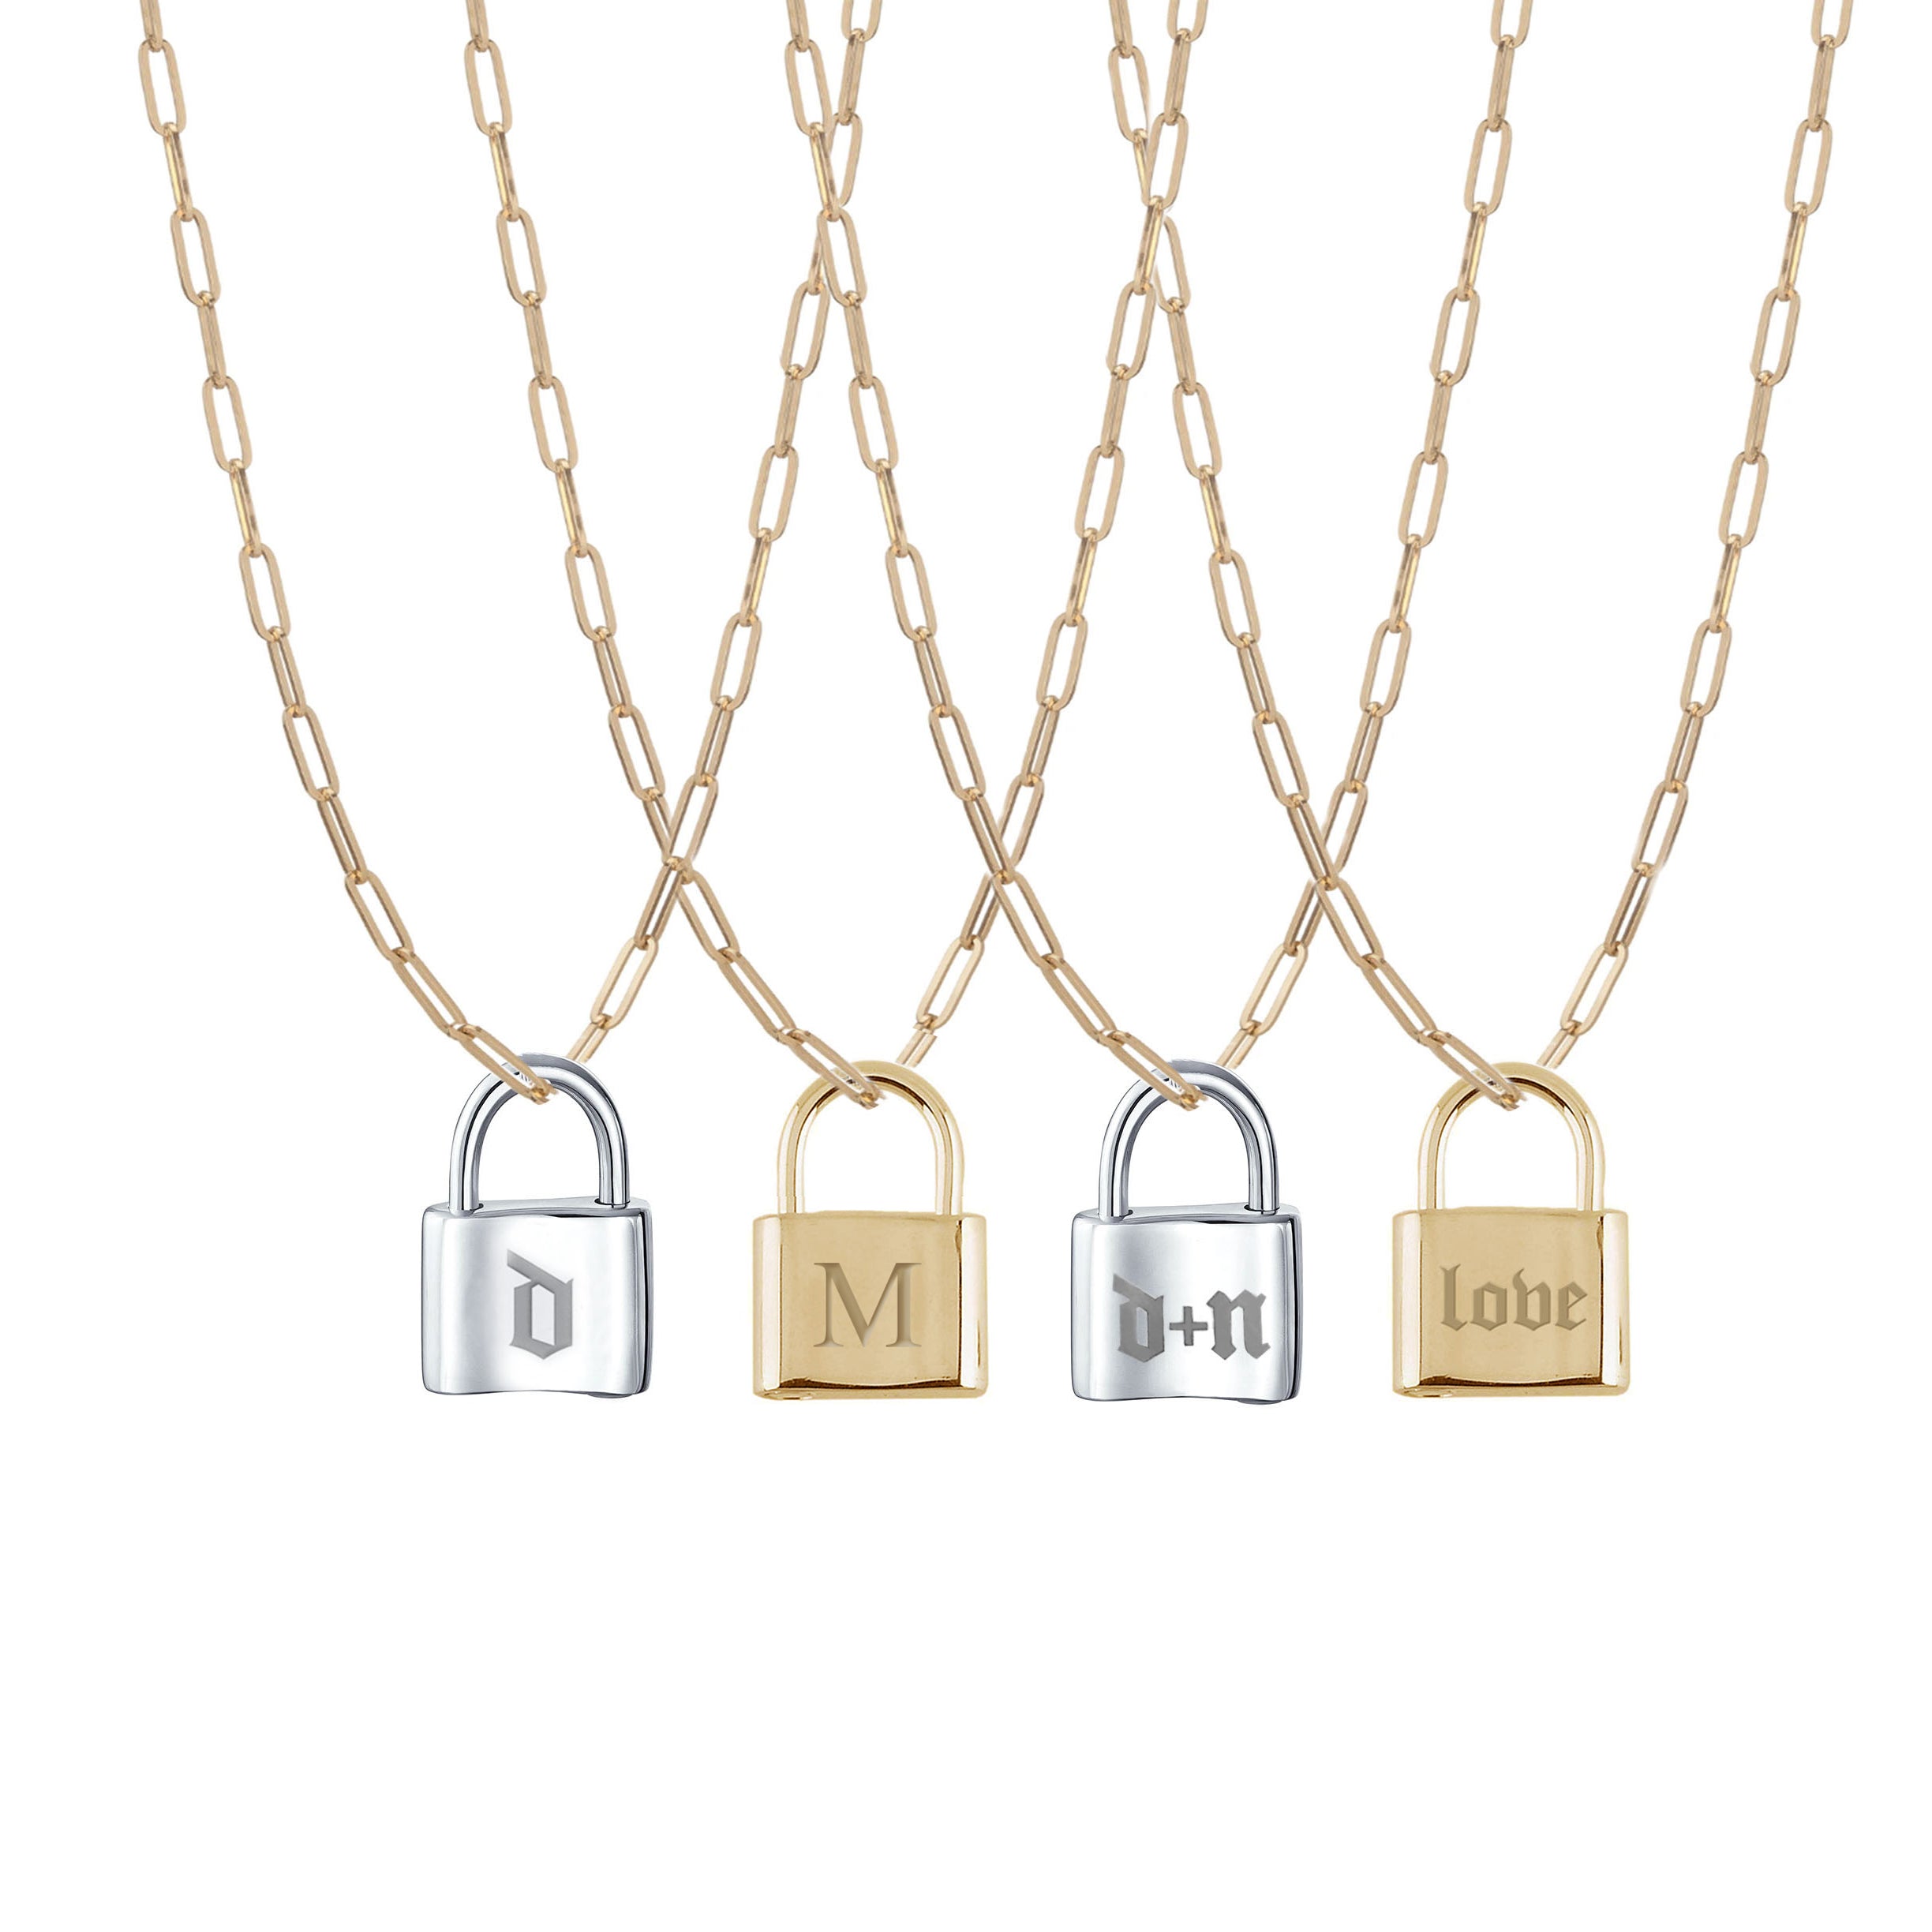 Stainless Steel Initial Padlock Pendant With 26 Letters For Women Gold Lock,  Perfect For Parties, Weddings, And Gifts Gord22 From Ellenolaf, $12.21 |  DHgate.Com